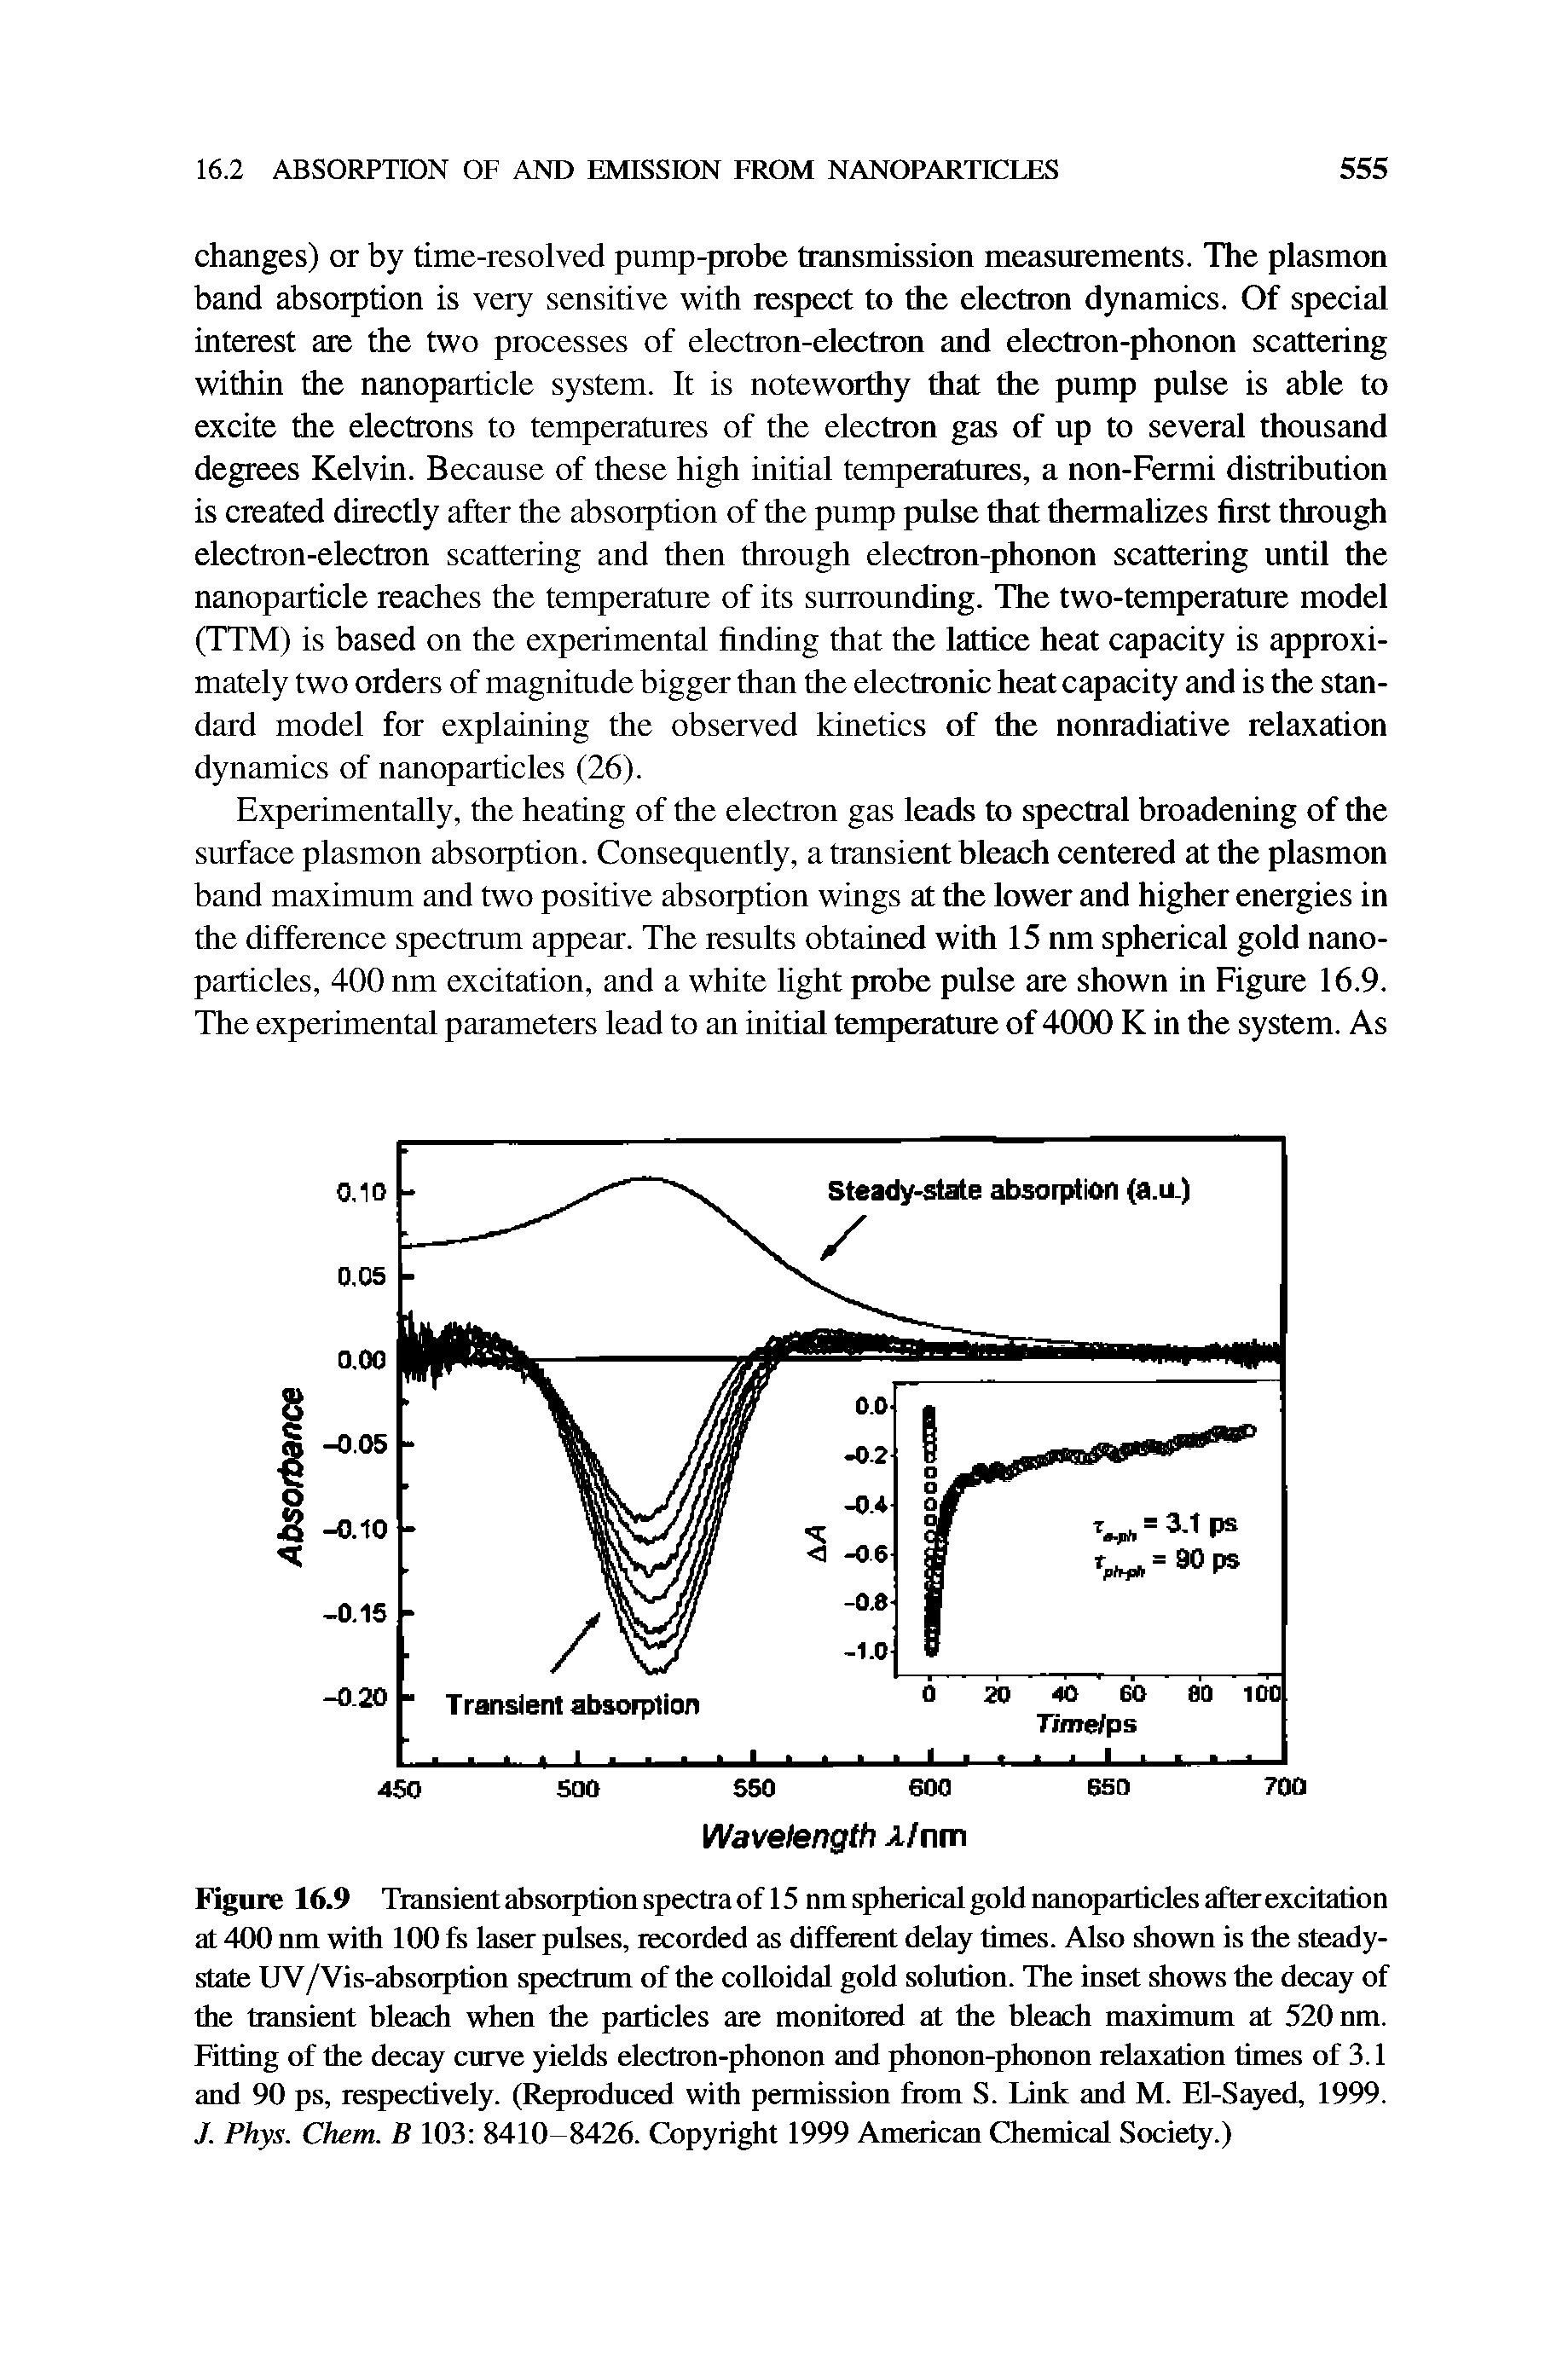 Figure 16.9 Transient absorption spectra of 15 nm spherical gold nanoparticles after excitation at 400 nm with 100 fs laser pulses, recorded as different delay times. Also shown is the steady-state UV/Vis-absorption spectrum of the colloidal gold solution. The inset shows the decay of the transient bleach when the particles are monitored at the hleach maximum at 520 nm. Fitting of the decay curve yields electron-phonon and phonon-phonon relaxation times of 3.1 and 90 ps, respectively. (Reproduced with permission from S. Link and M. El-Sayed, 1999. J. Phys. Chem. B 103 8410 8426. Copyright 1999 American Chemical Society.)...